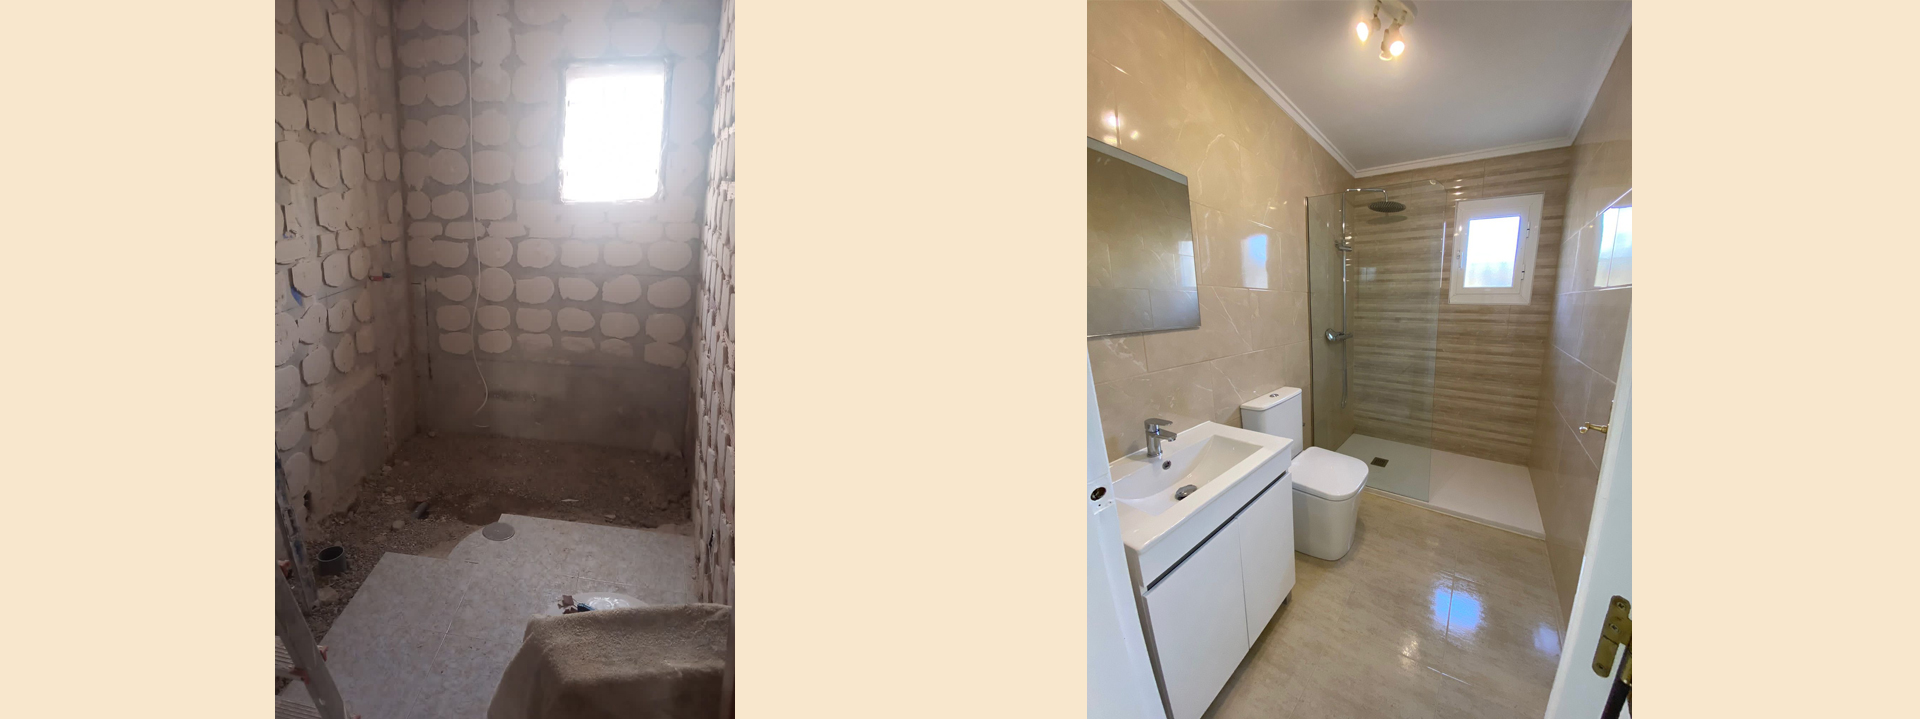 Bathroom-renovation-before-and-after-4